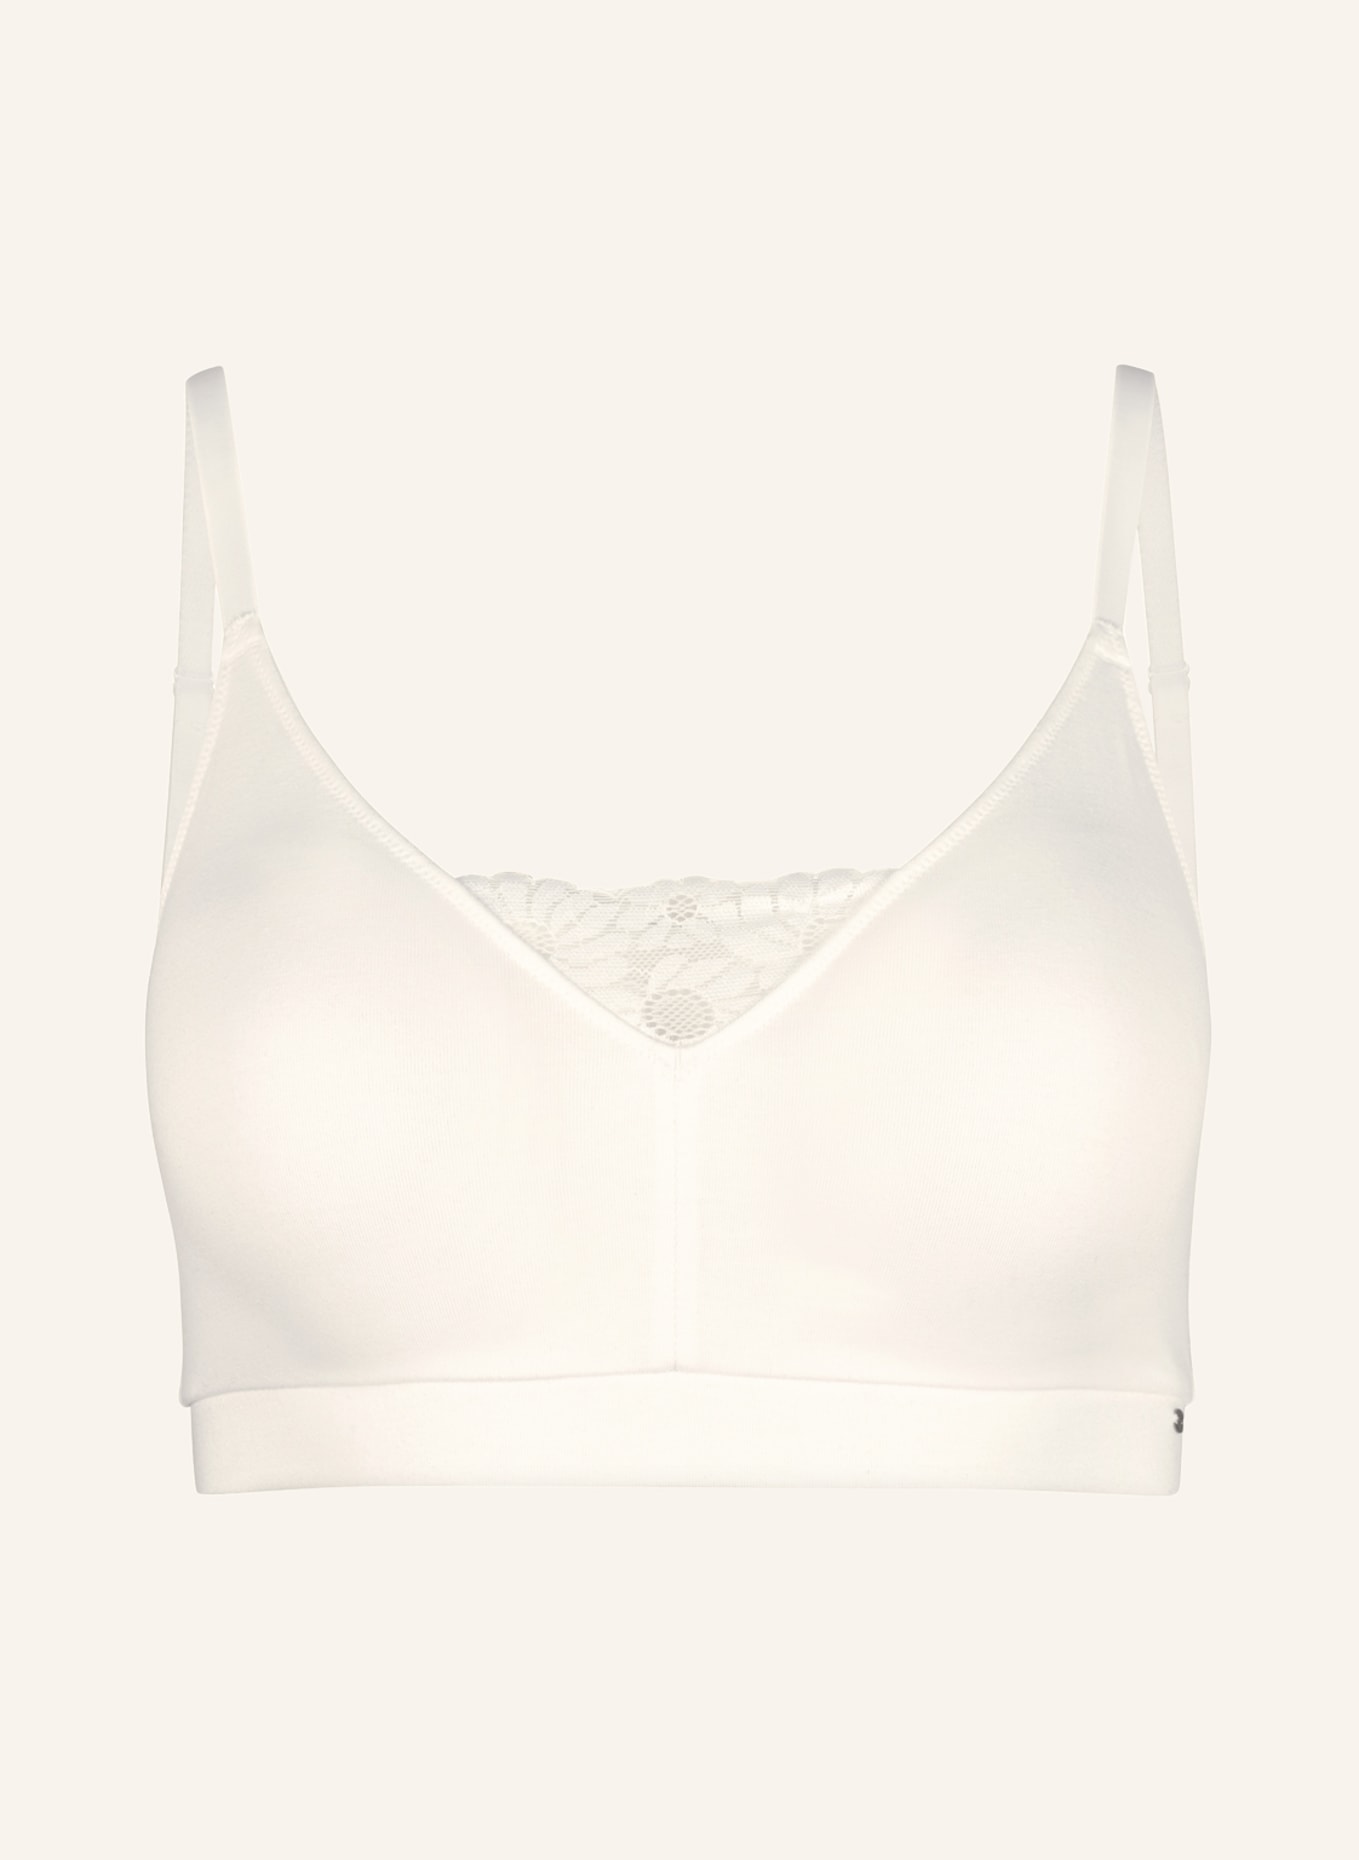 Skiny Triangel-BH EVERY DAY IN COTTON LACE, Farbe: WEISS (Bild 1)